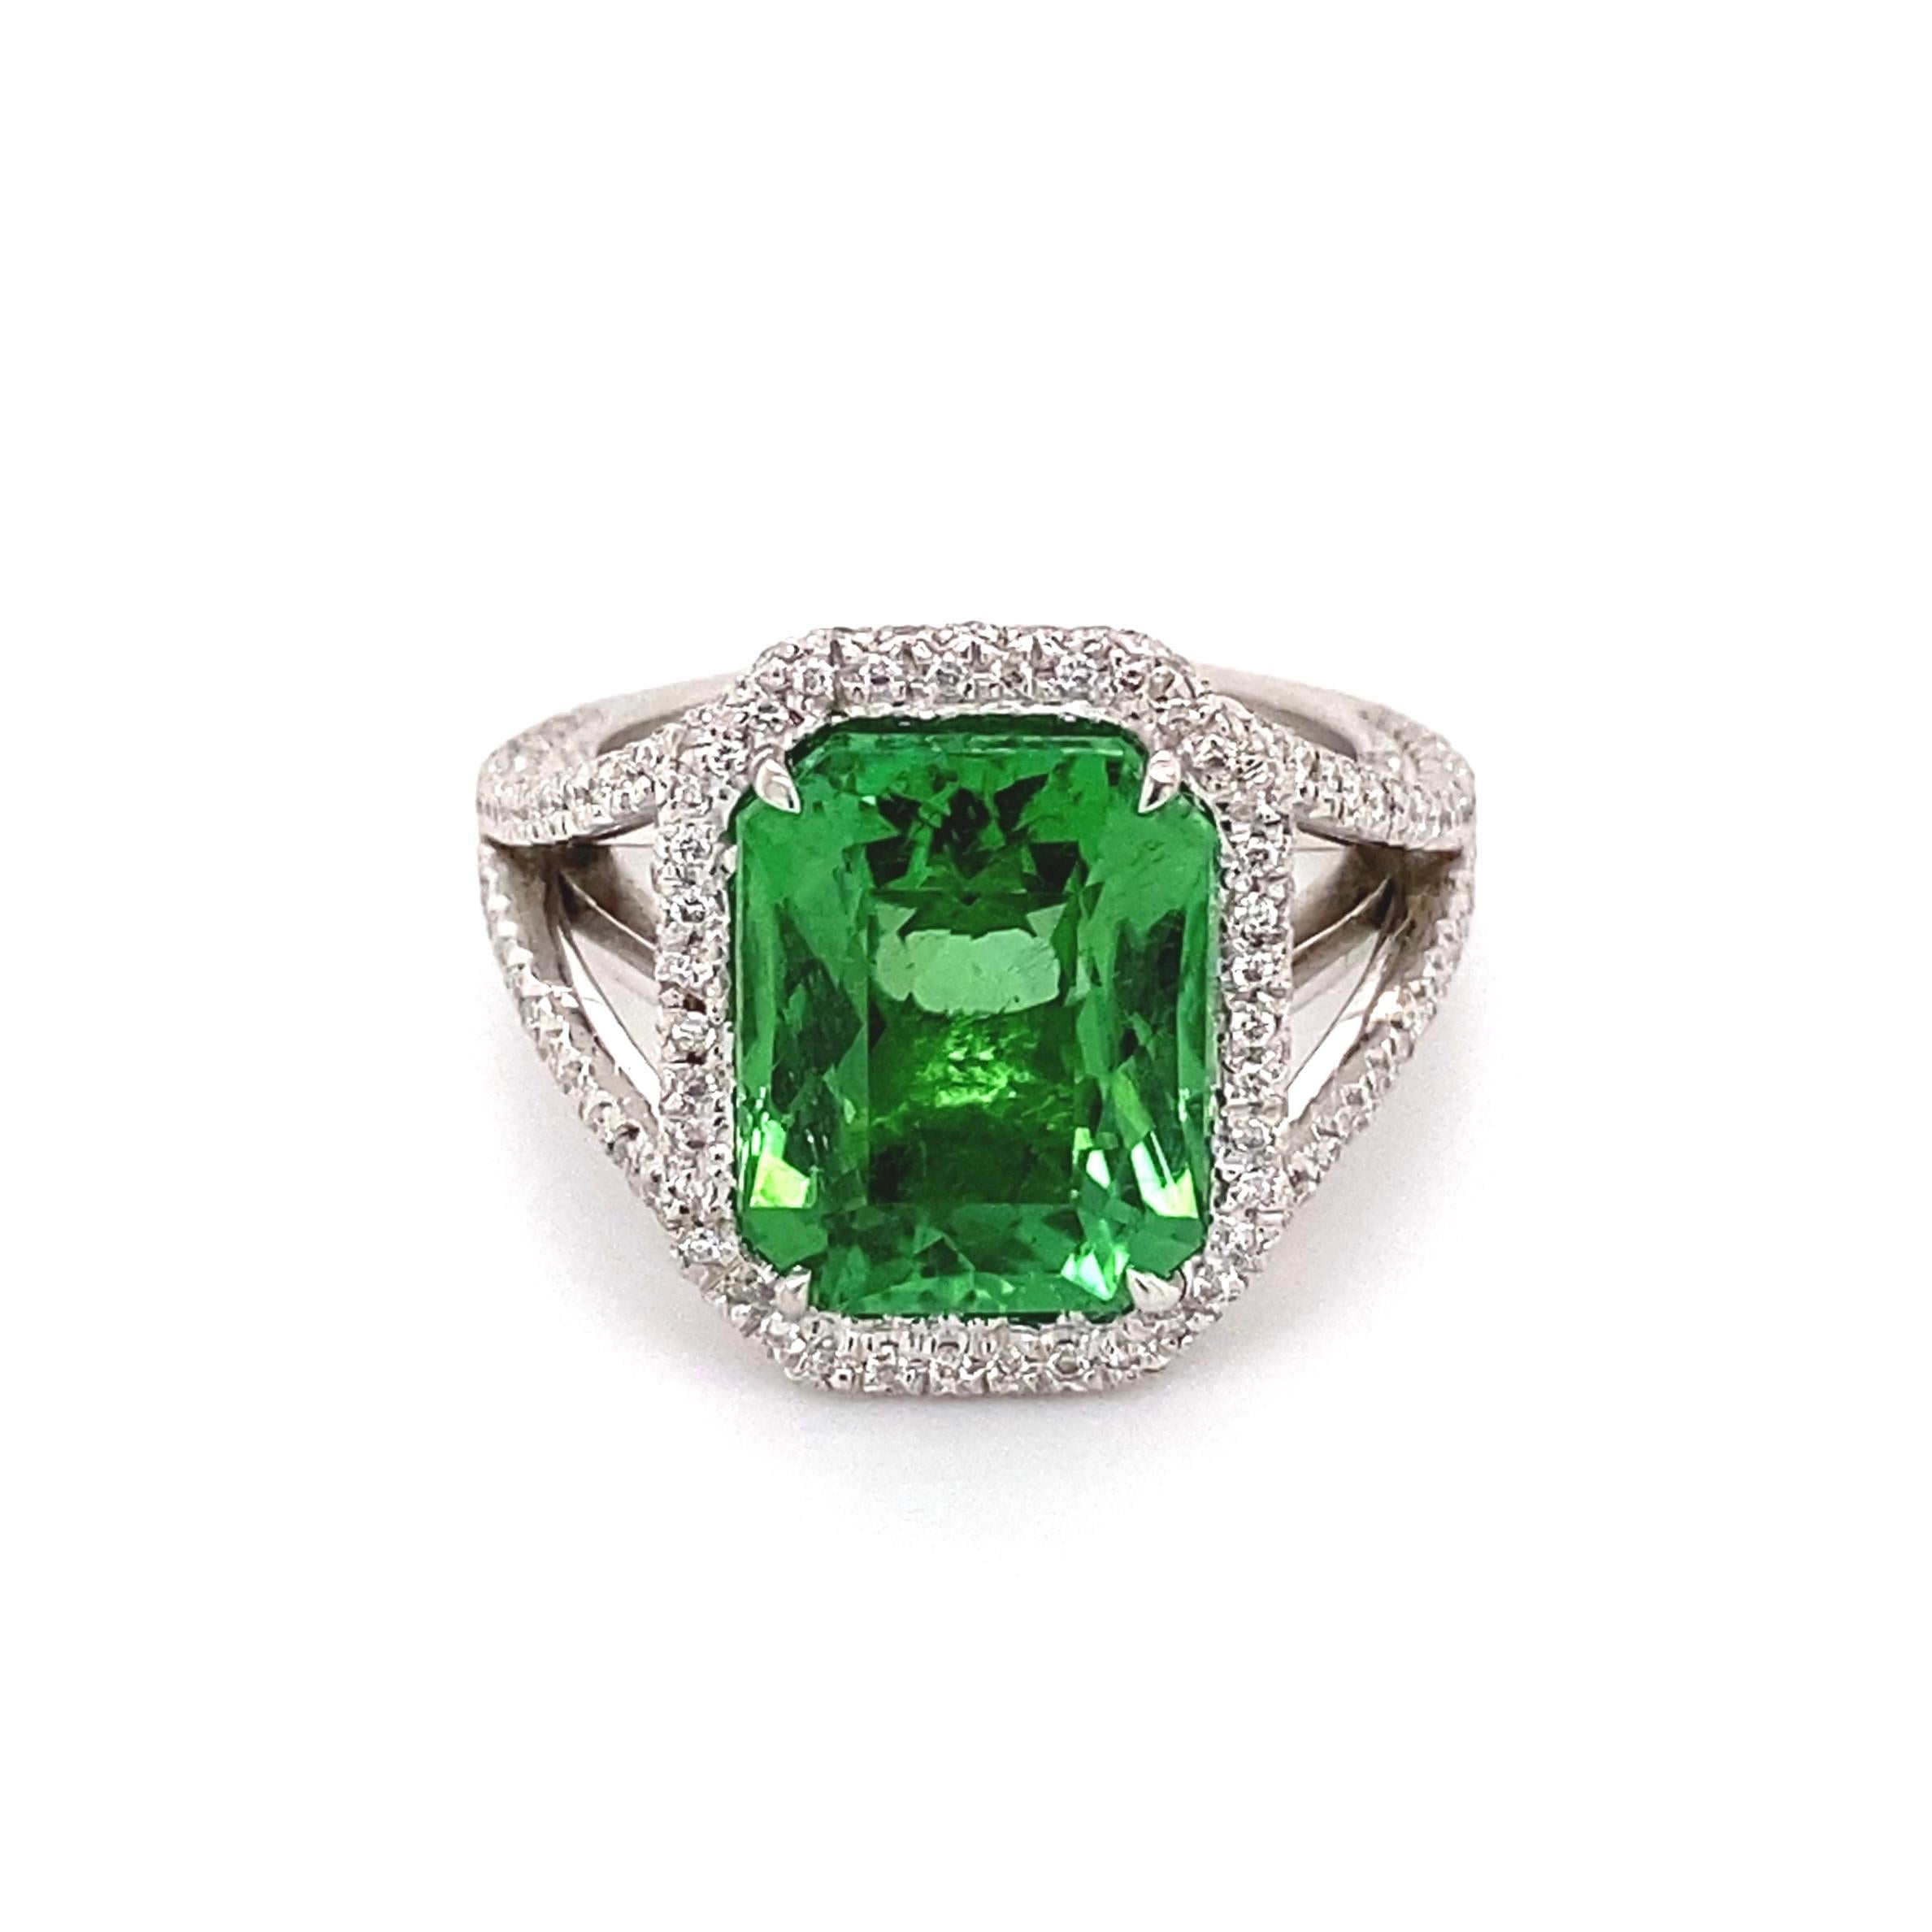 6.00 Carat Green Paraiba Tourmaline Diamond Platinum Ring Estate Fine Jewelry In Excellent Condition For Sale In Montreal, QC